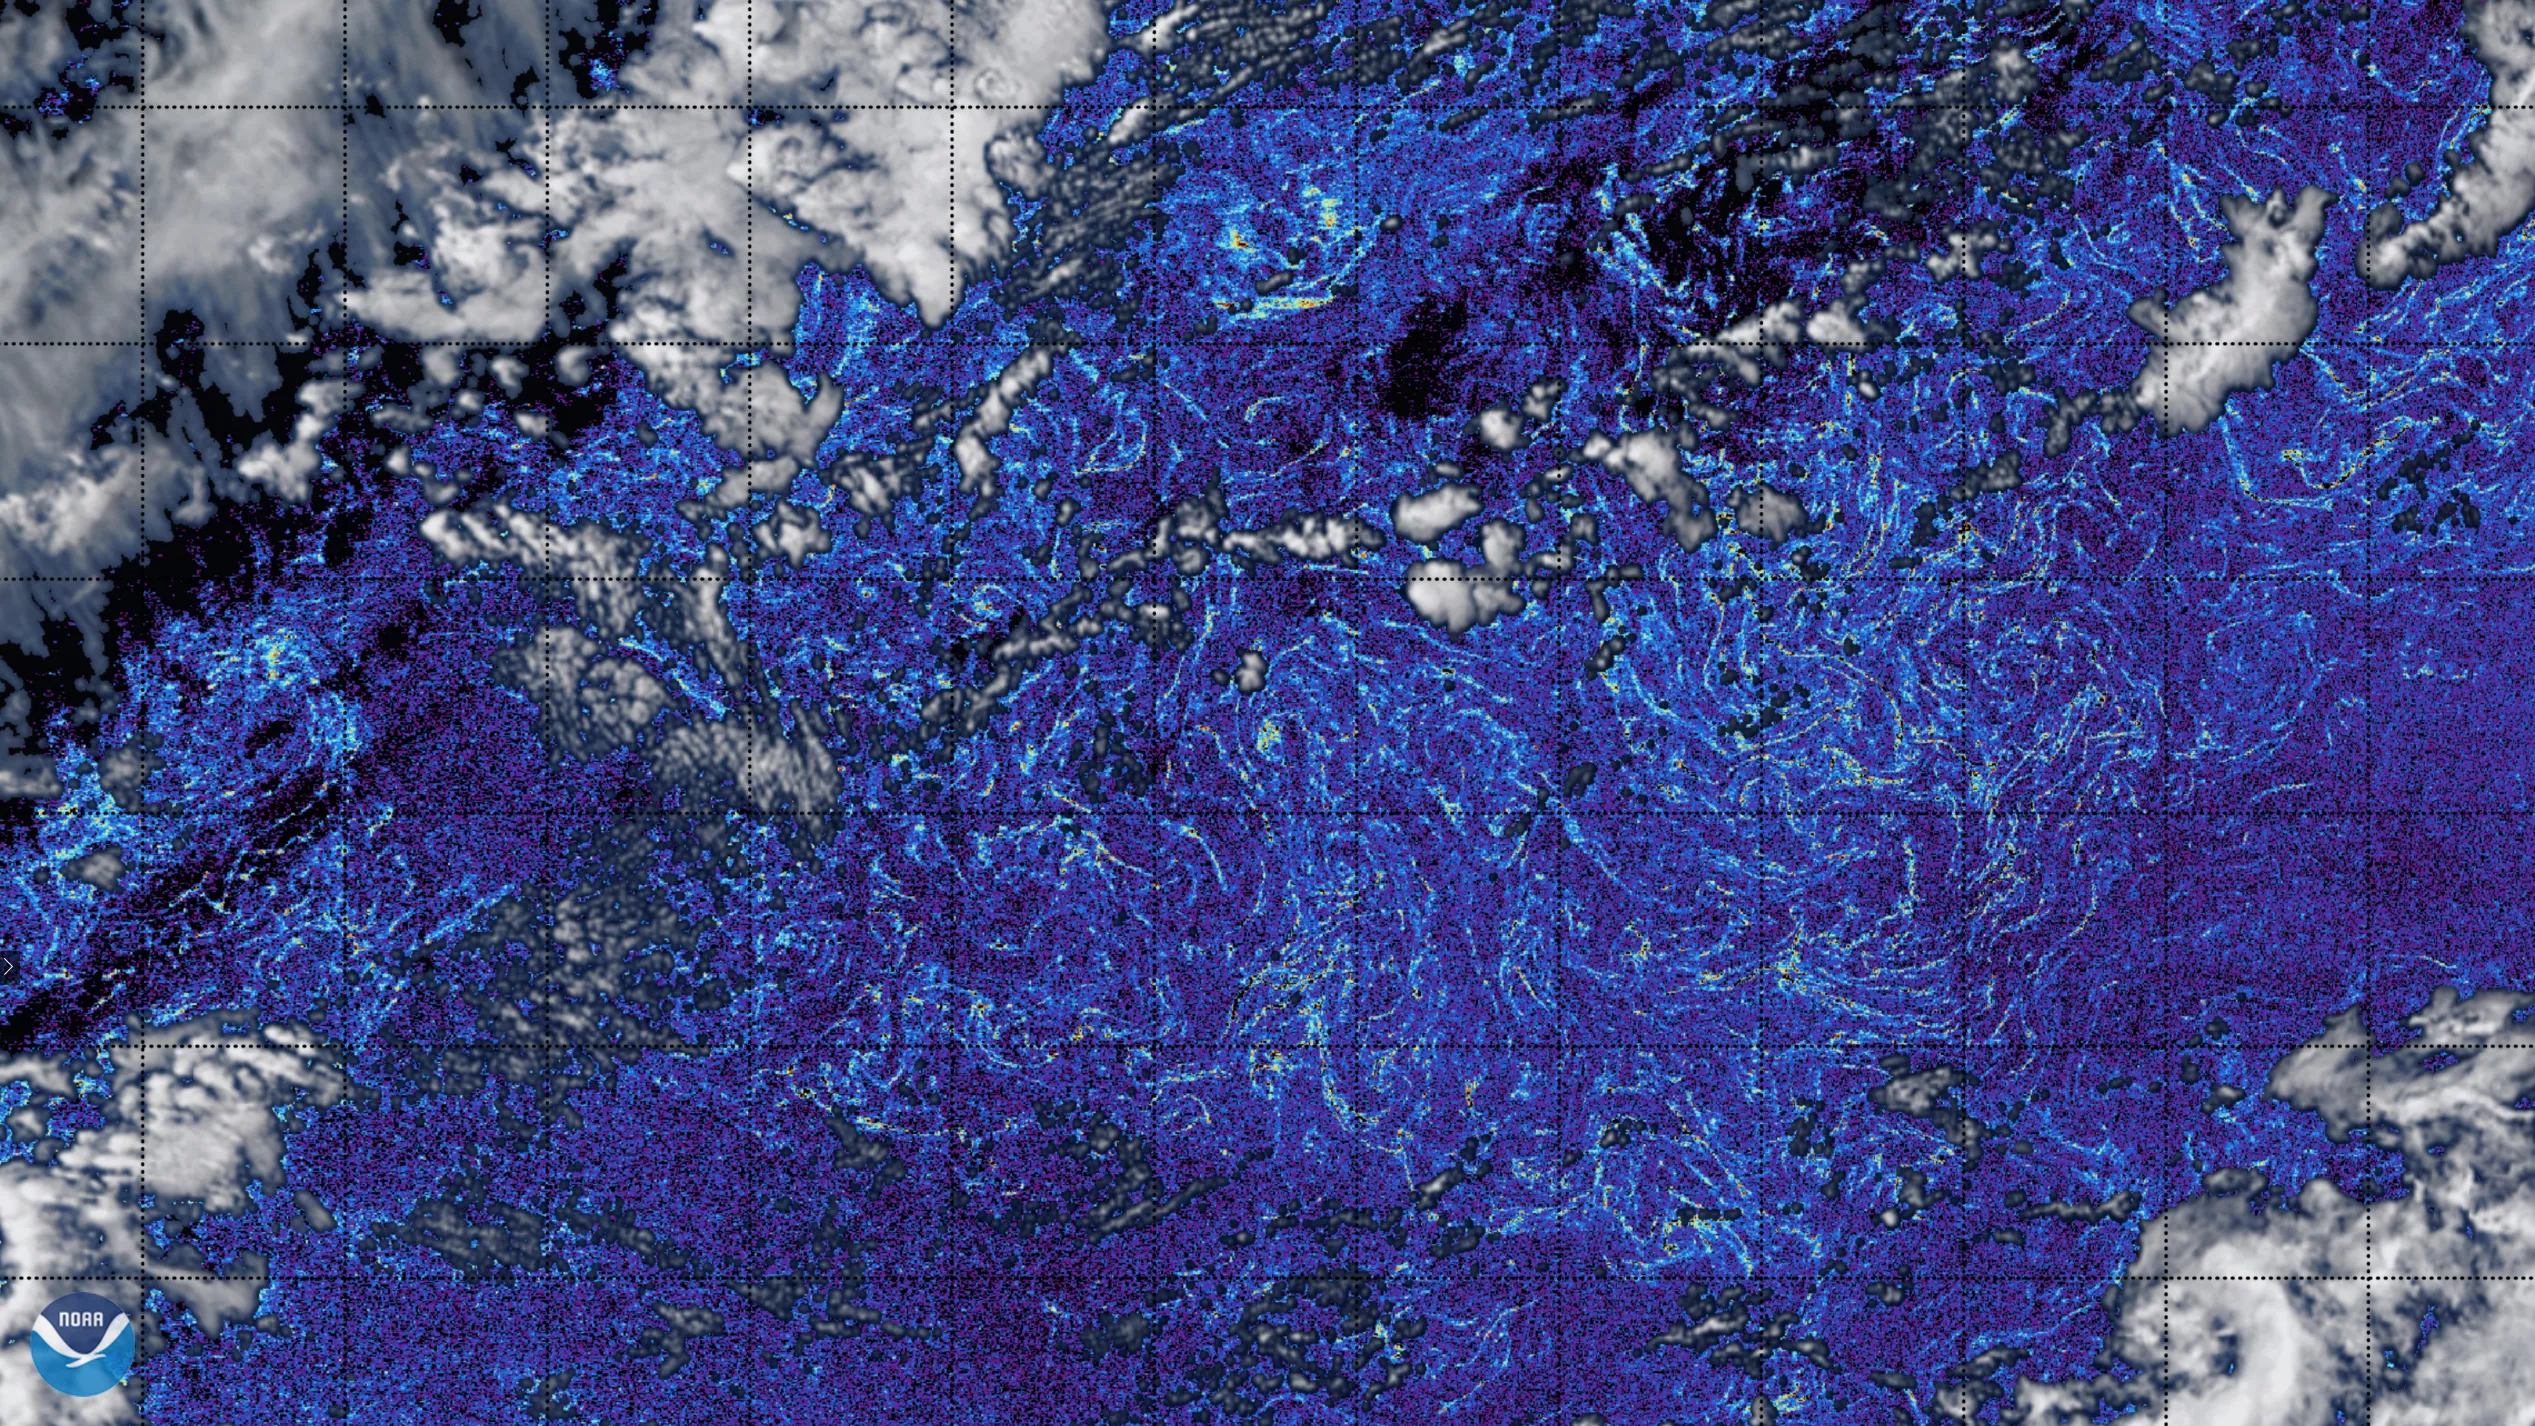 Sargassum in the Sargasso Sea, with OLCI imagery/data.